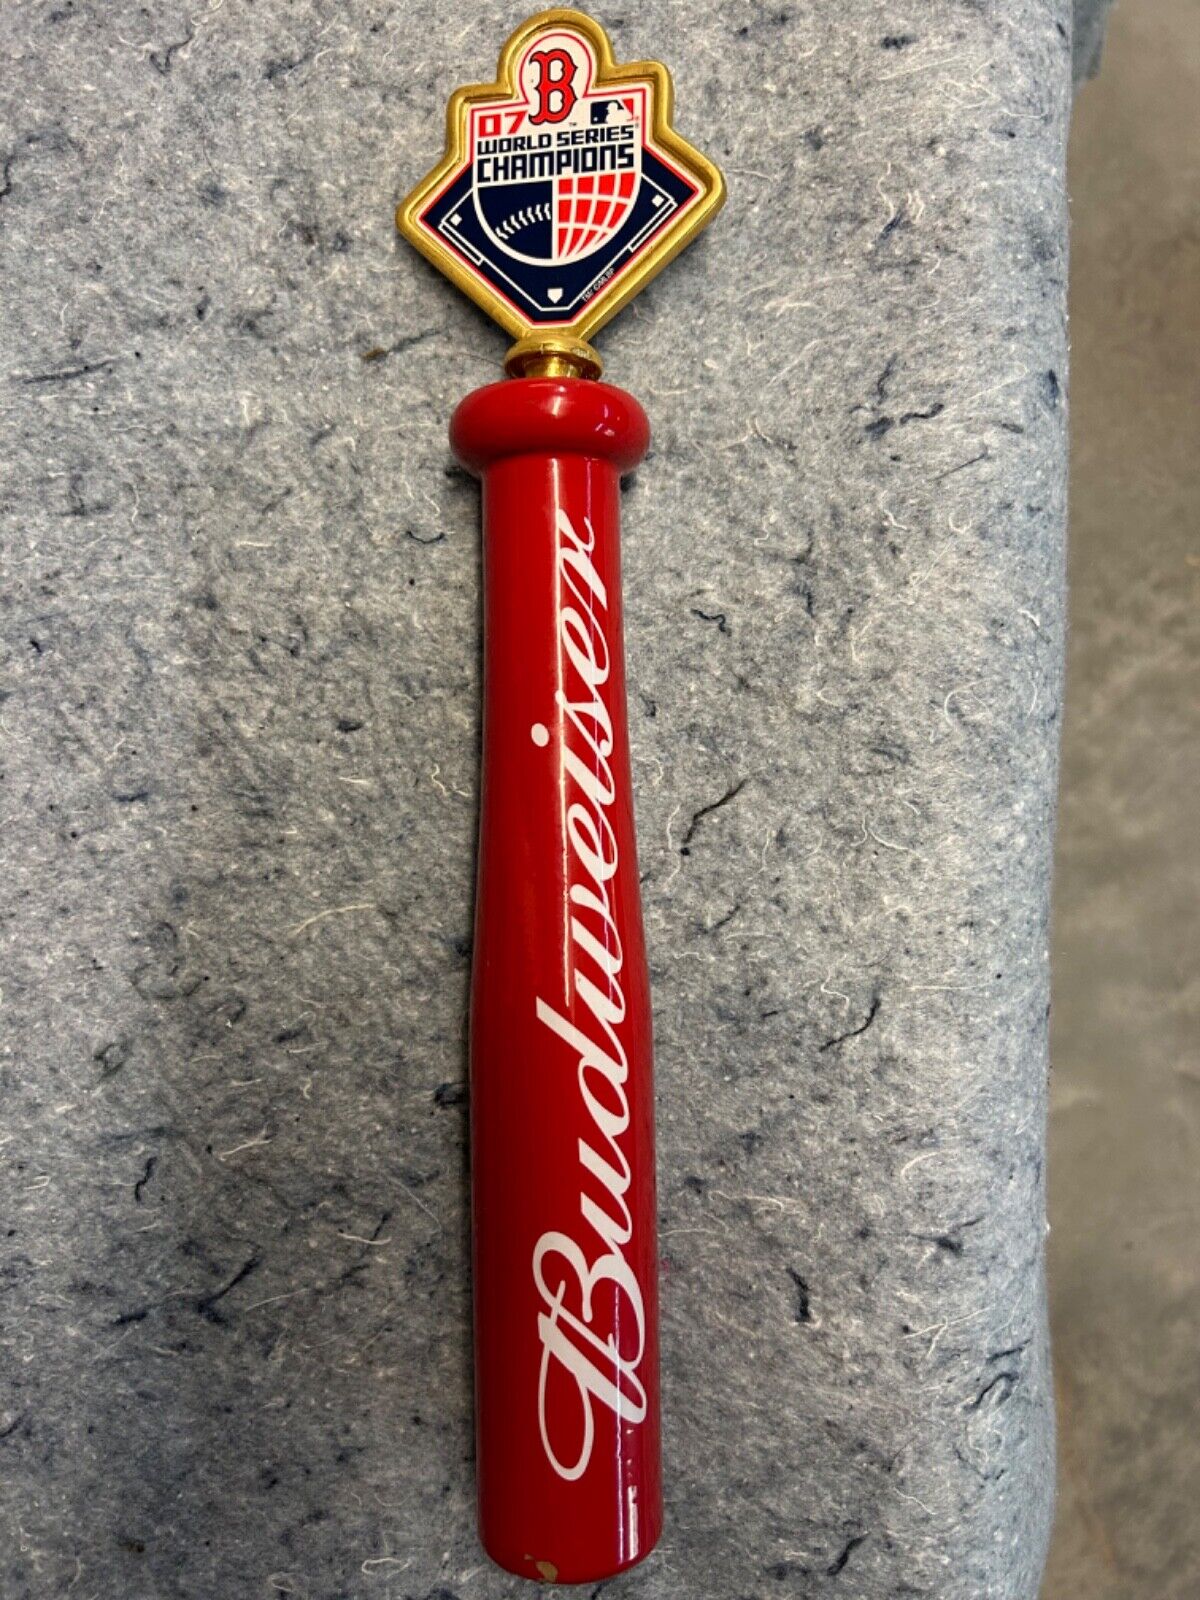 BUDWEISER BOSTON RED SOX WORLD SERIES CHAMPIONS 2007 Beer Tap Handle